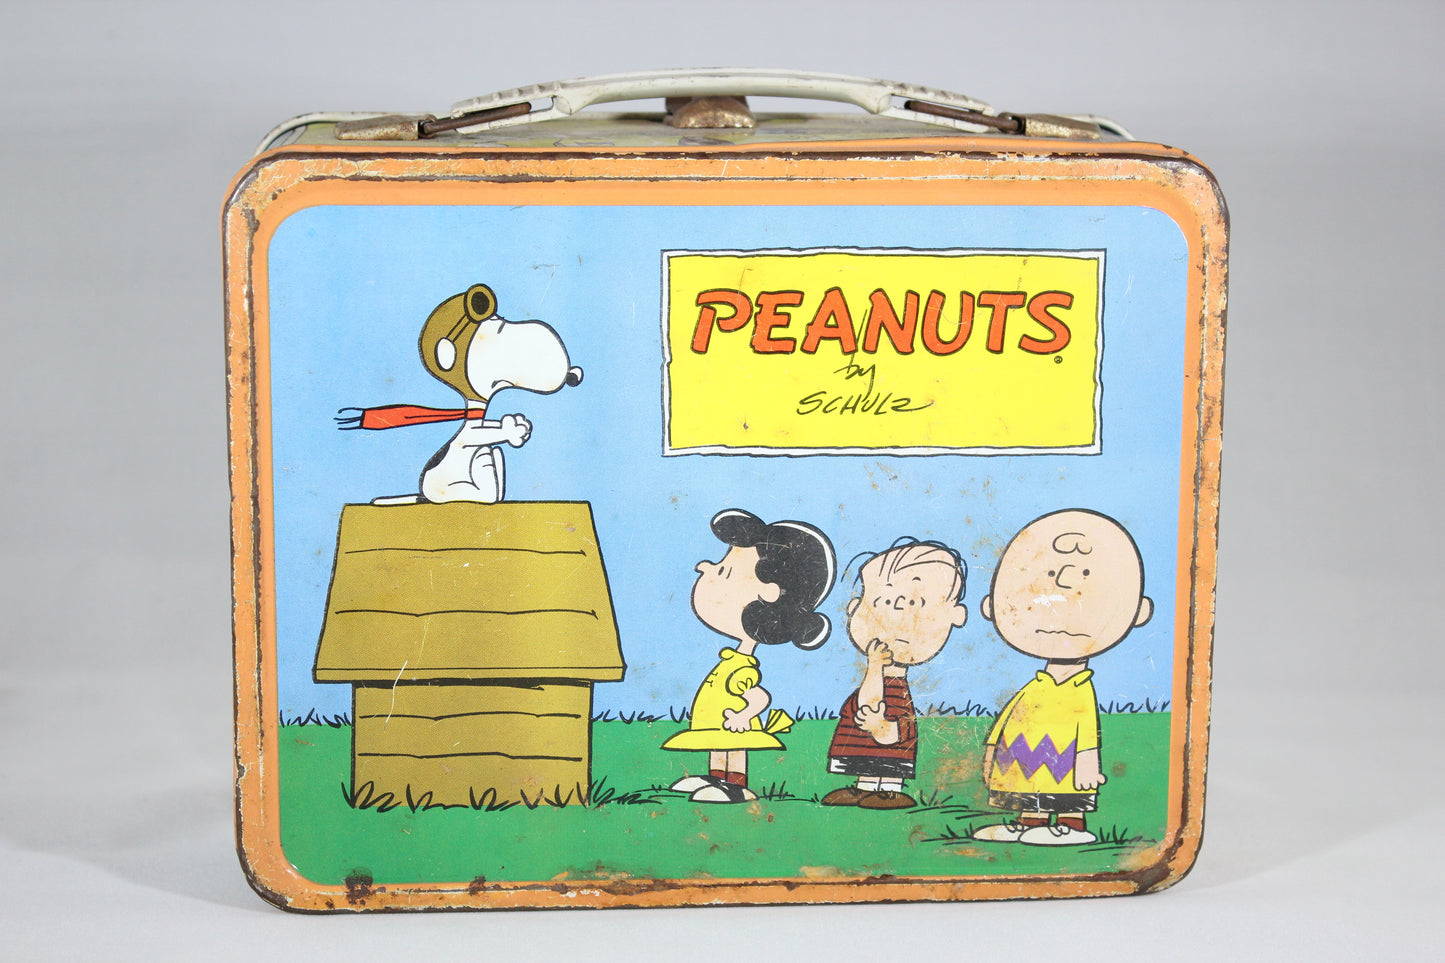 Peanuts by Schulz Thermos Brand Metal Lunchbox, 1959 – Memory Hole